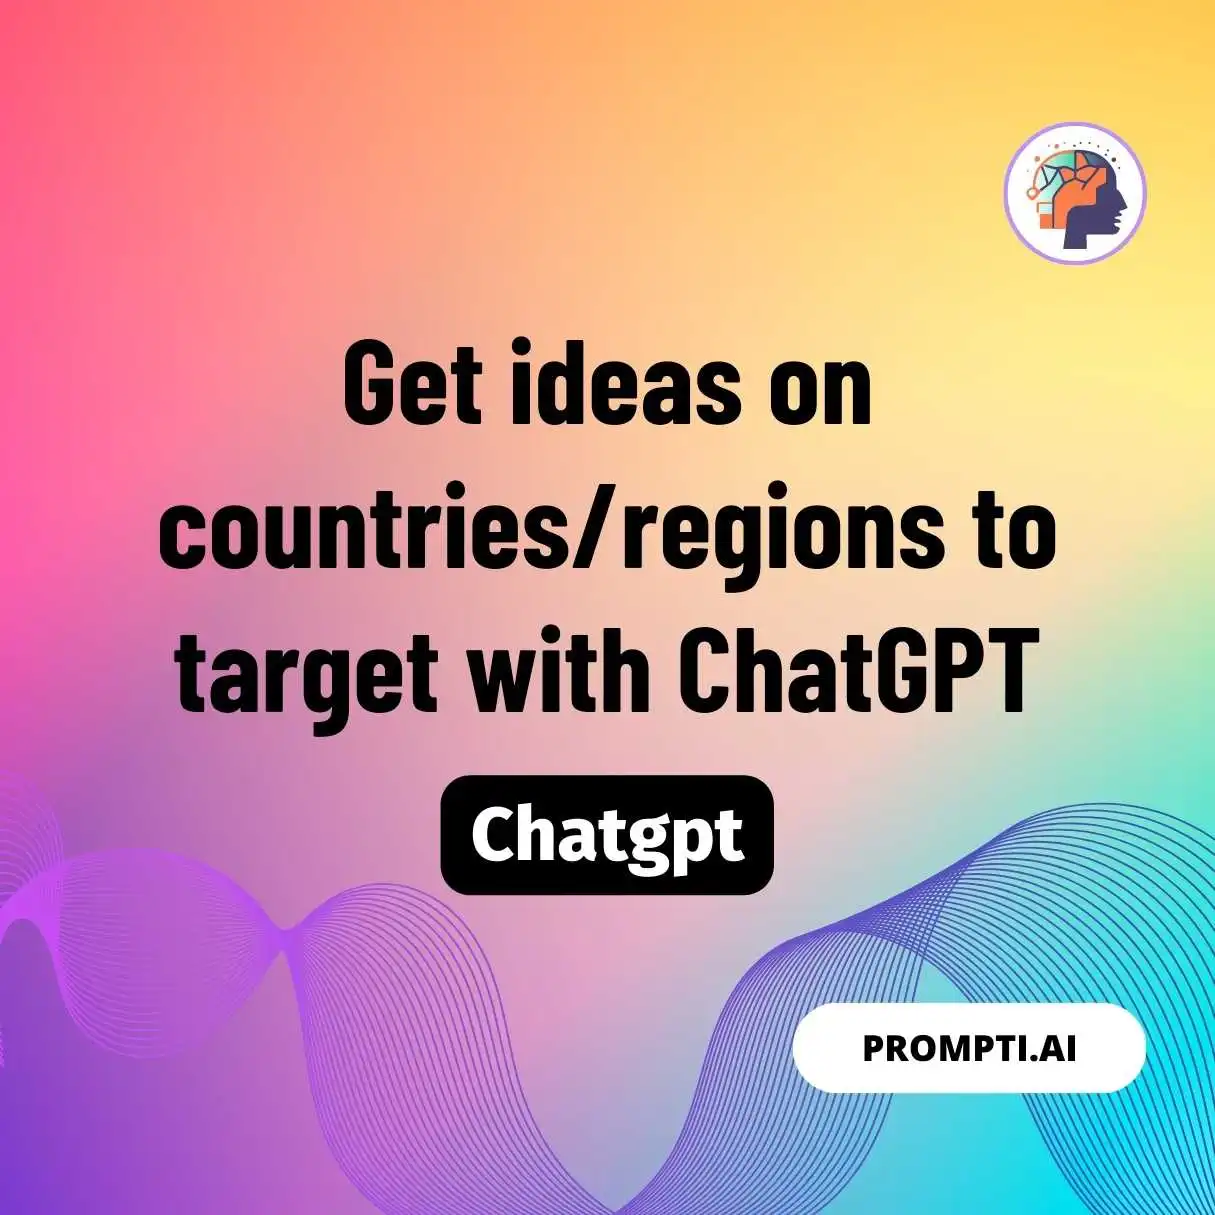 Get ideas on countries/regions to target with ChatGPT